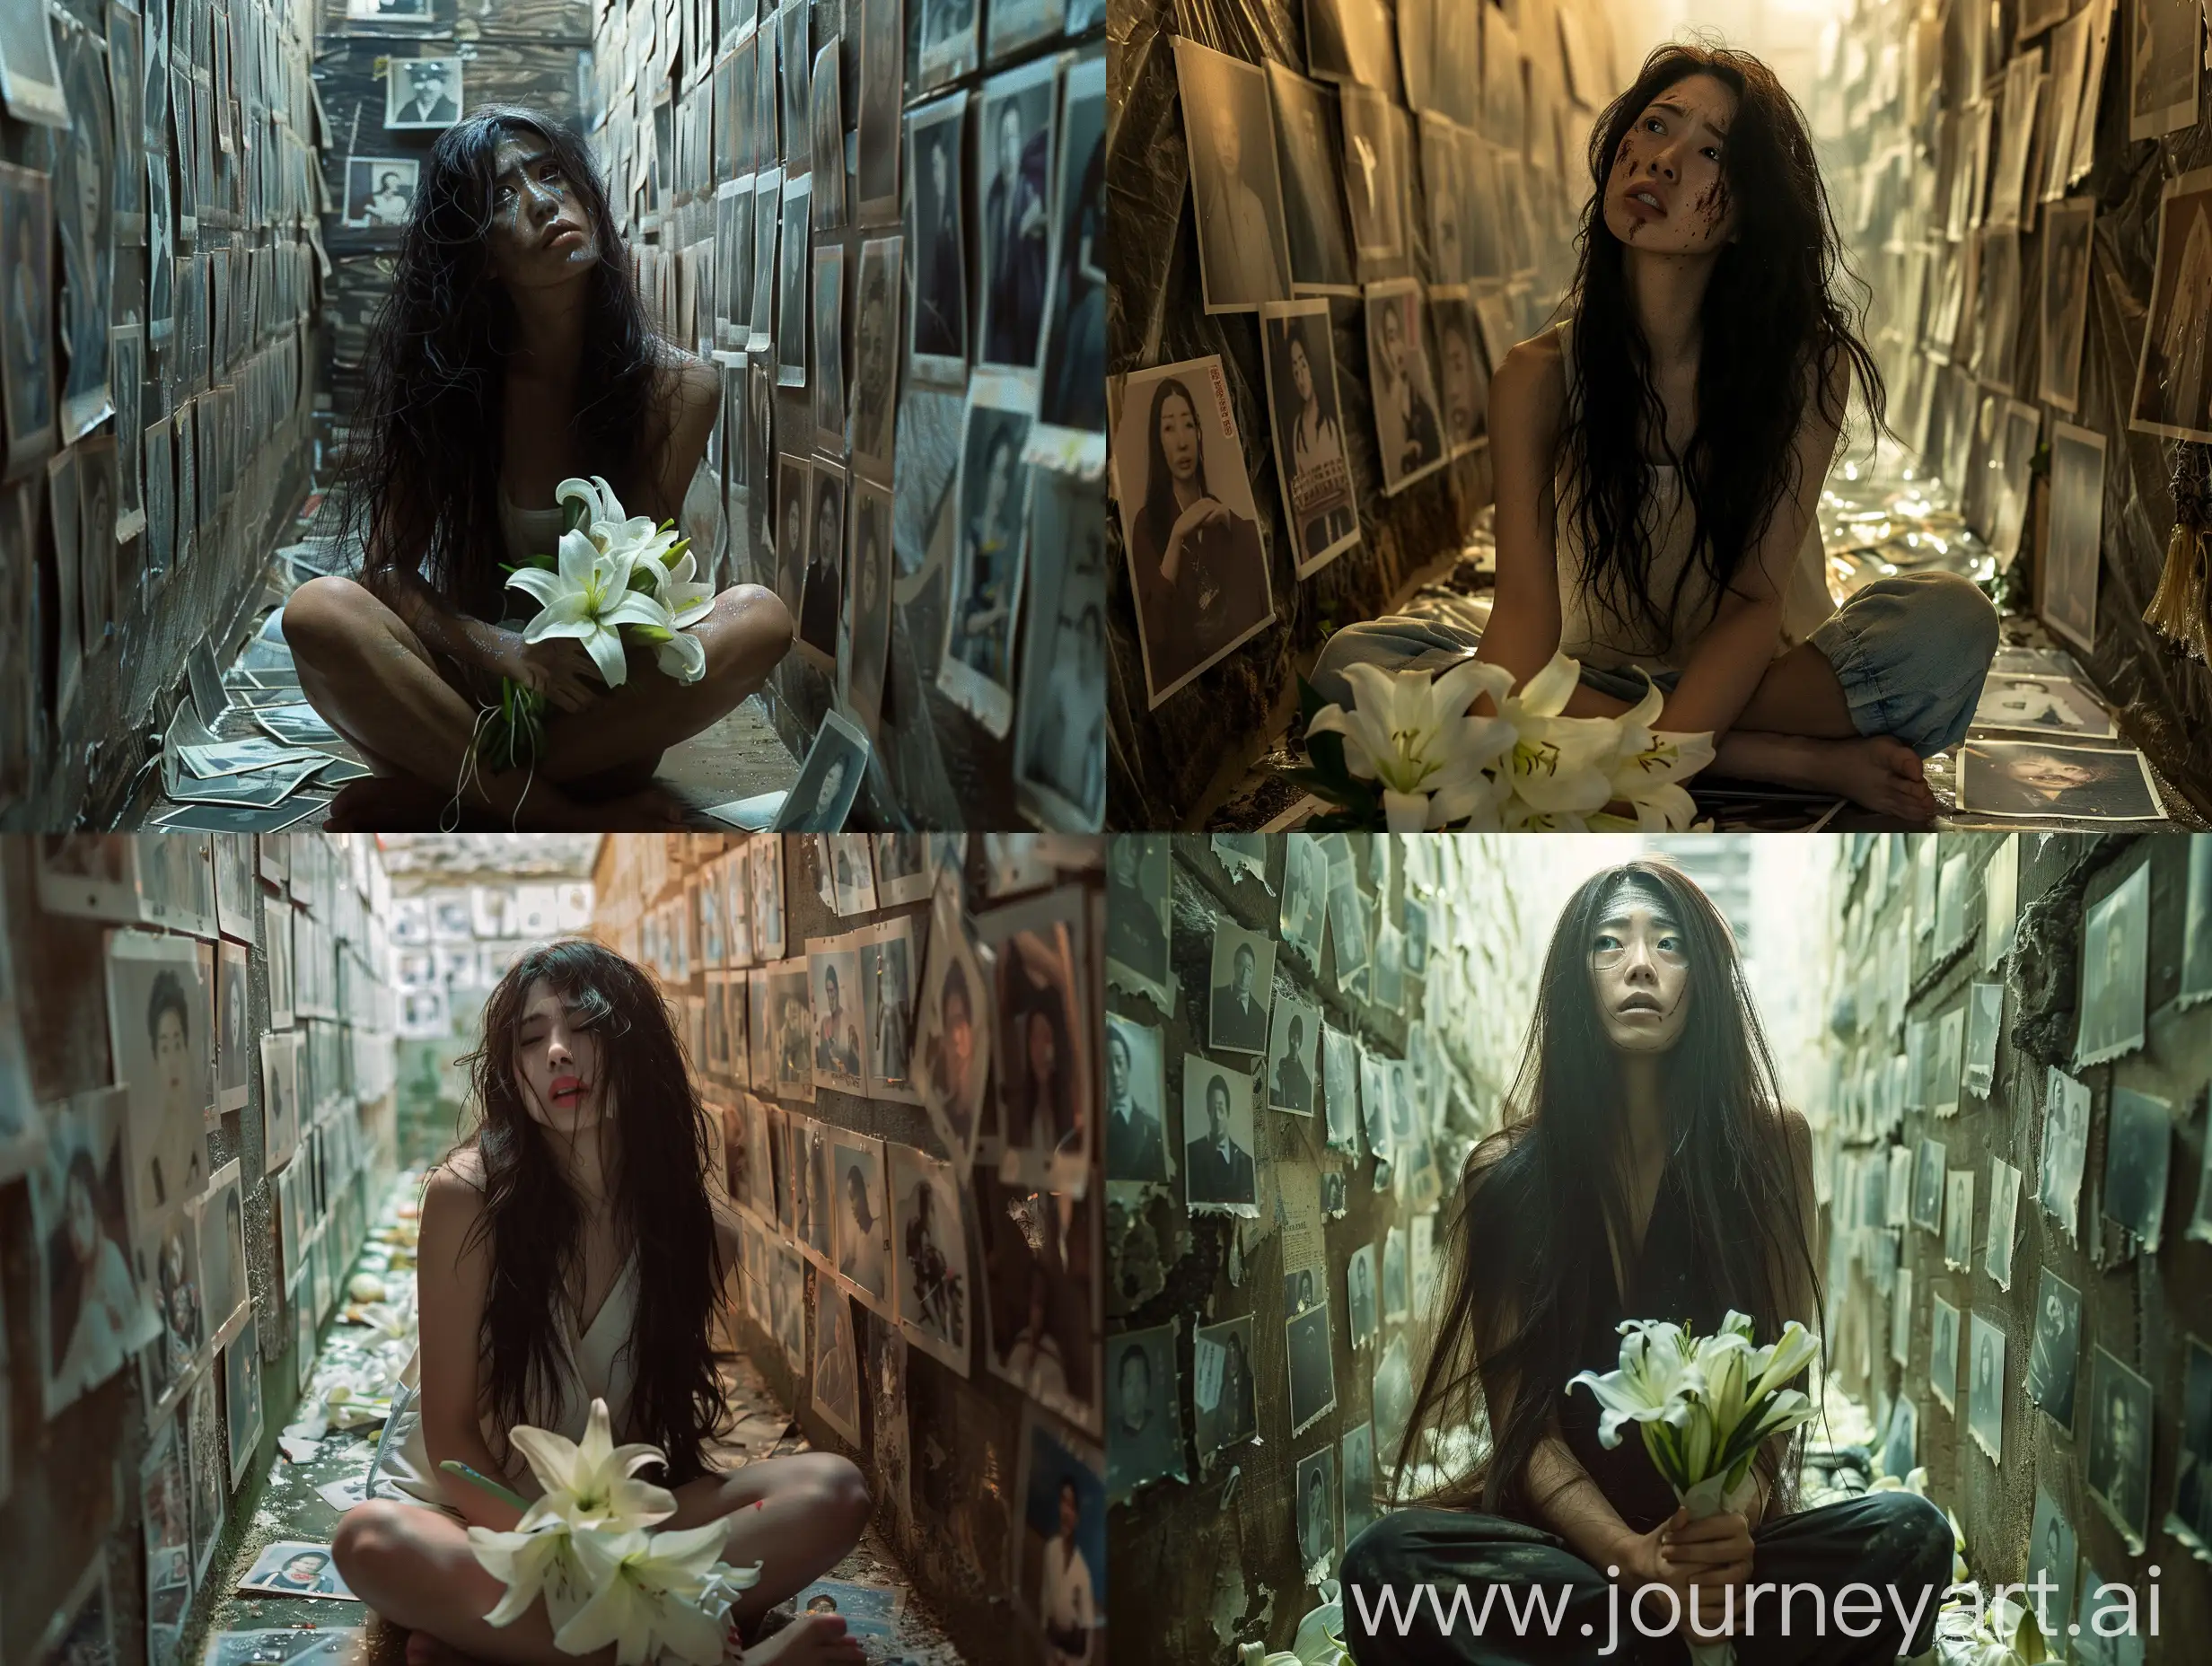 realistic movie stills, full body, full shot, wide shot, A beautiful Japanese woman with long hair is sitting on the ground shivering in a dimly lit narrow room. The walls are covered with real photos of different people. She is holding a bouquet of white lilies in her hand. movie stills, realism, clear light and shadow, movie texture, film photos, expired film, ninja looked melancholy, with a fierce look in his eyes, creating a melancholy atmosphere , an amazing fantasy movie scene, strong dramatic tension, rich details, clear light and shadow, a strong sense of cinema